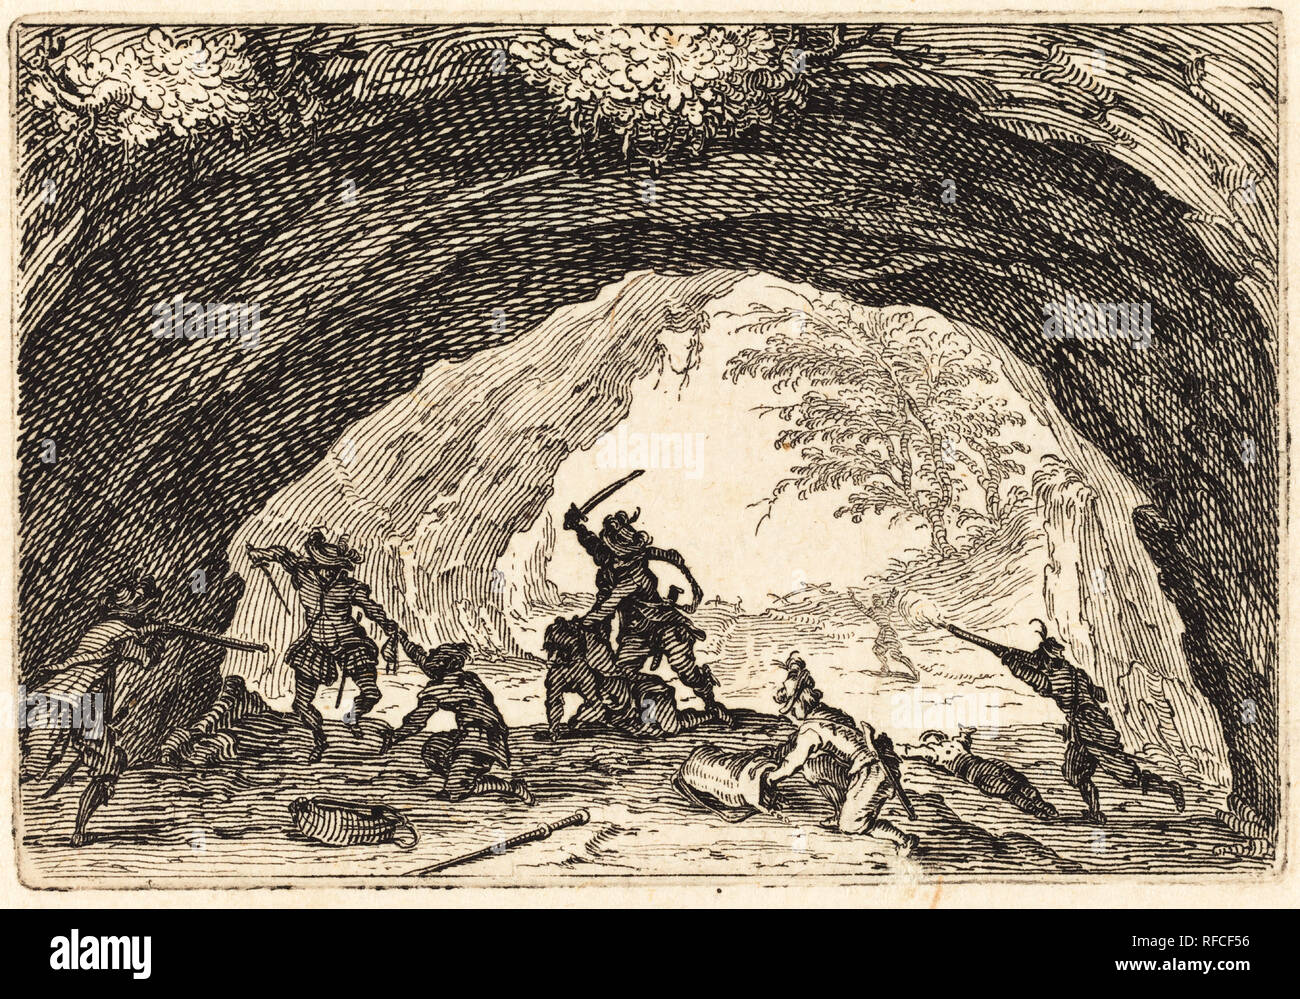 Soldiers Attacking Robbers. Dated: c. 1622. Medium: etching. Museum: National Gallery of Art, Washington DC. Author: JACQUES CALLOT. CALLOT, JACQUES. Stock Photo